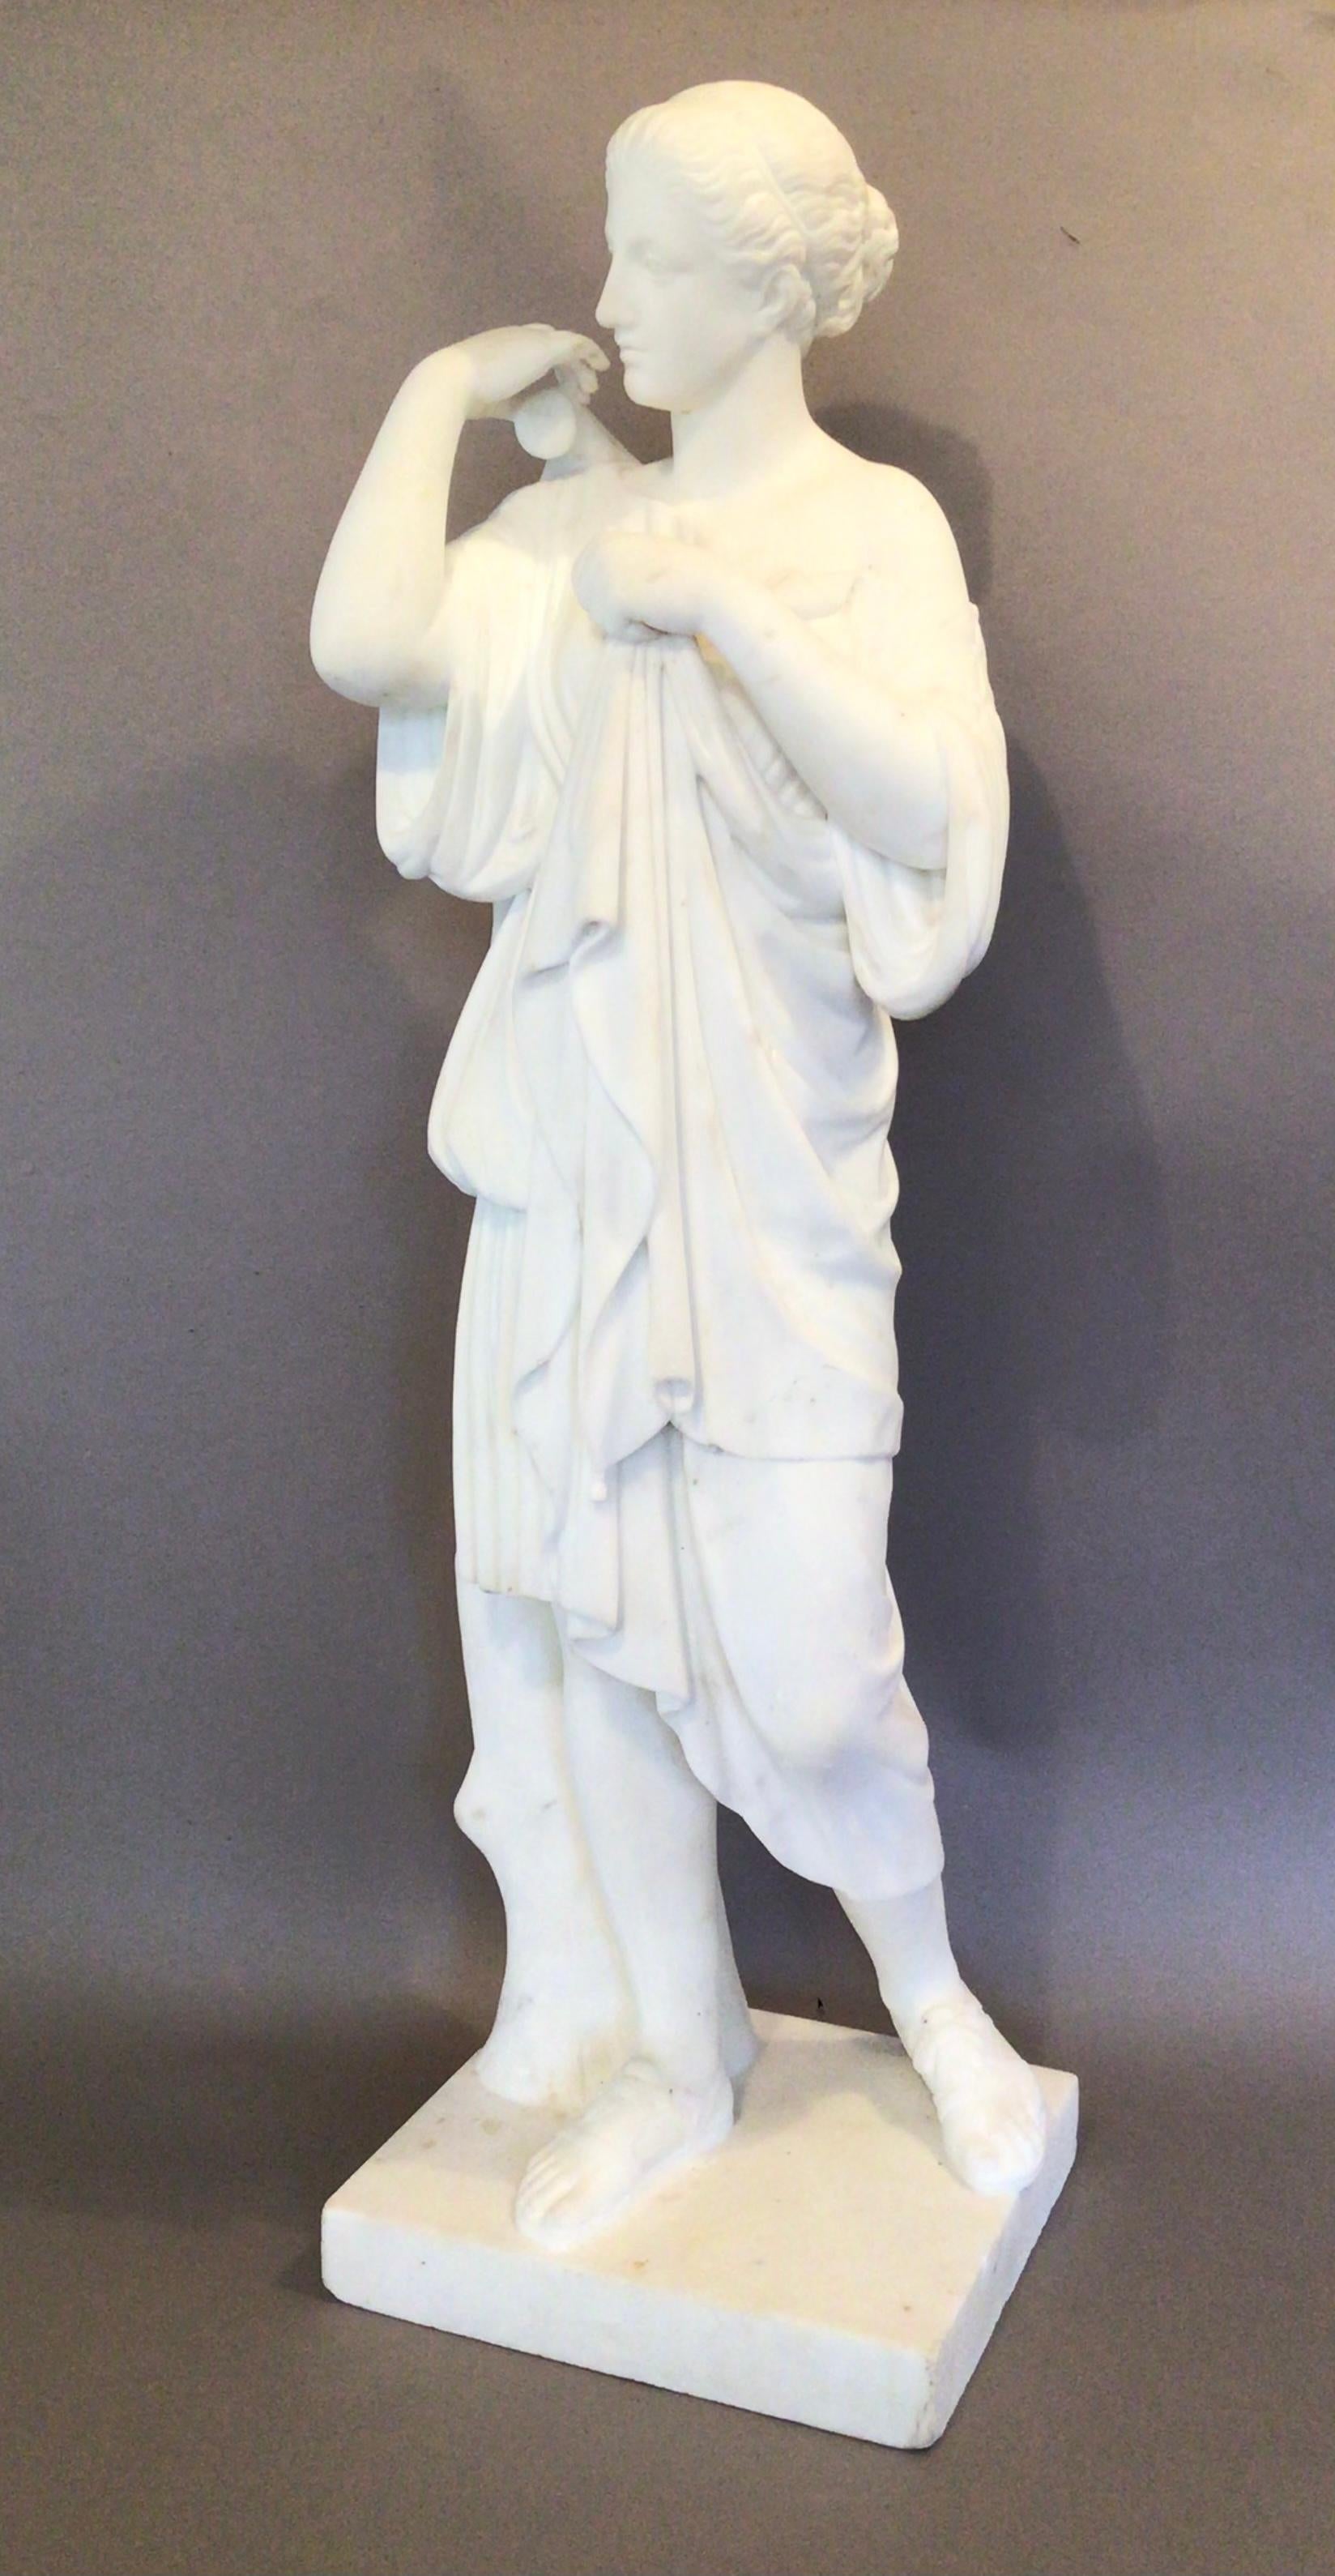 Early C19th ‘Grand Tour’ statue of ‘Diane de Gabies’, finely carved in Carrara marble. Diane stood next to a tree stump with her hair tied back and her head tilted to the right where she is fixing the clasp on her tunic. 28